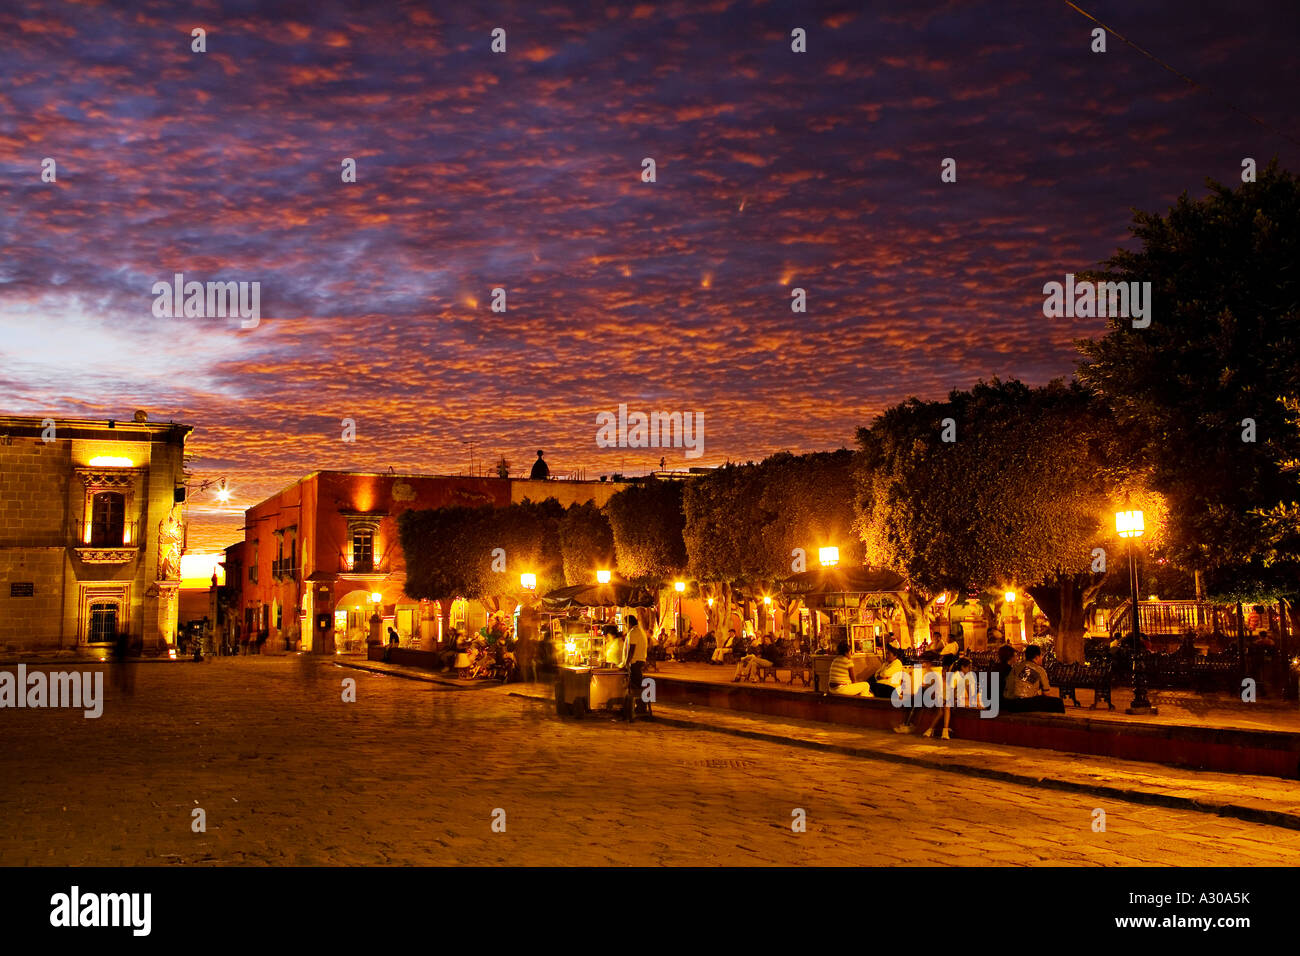 MEXICO San Miguel de Allende Sunset sky over Jardin Principal street vendors and people sitting under trees Stock Photo